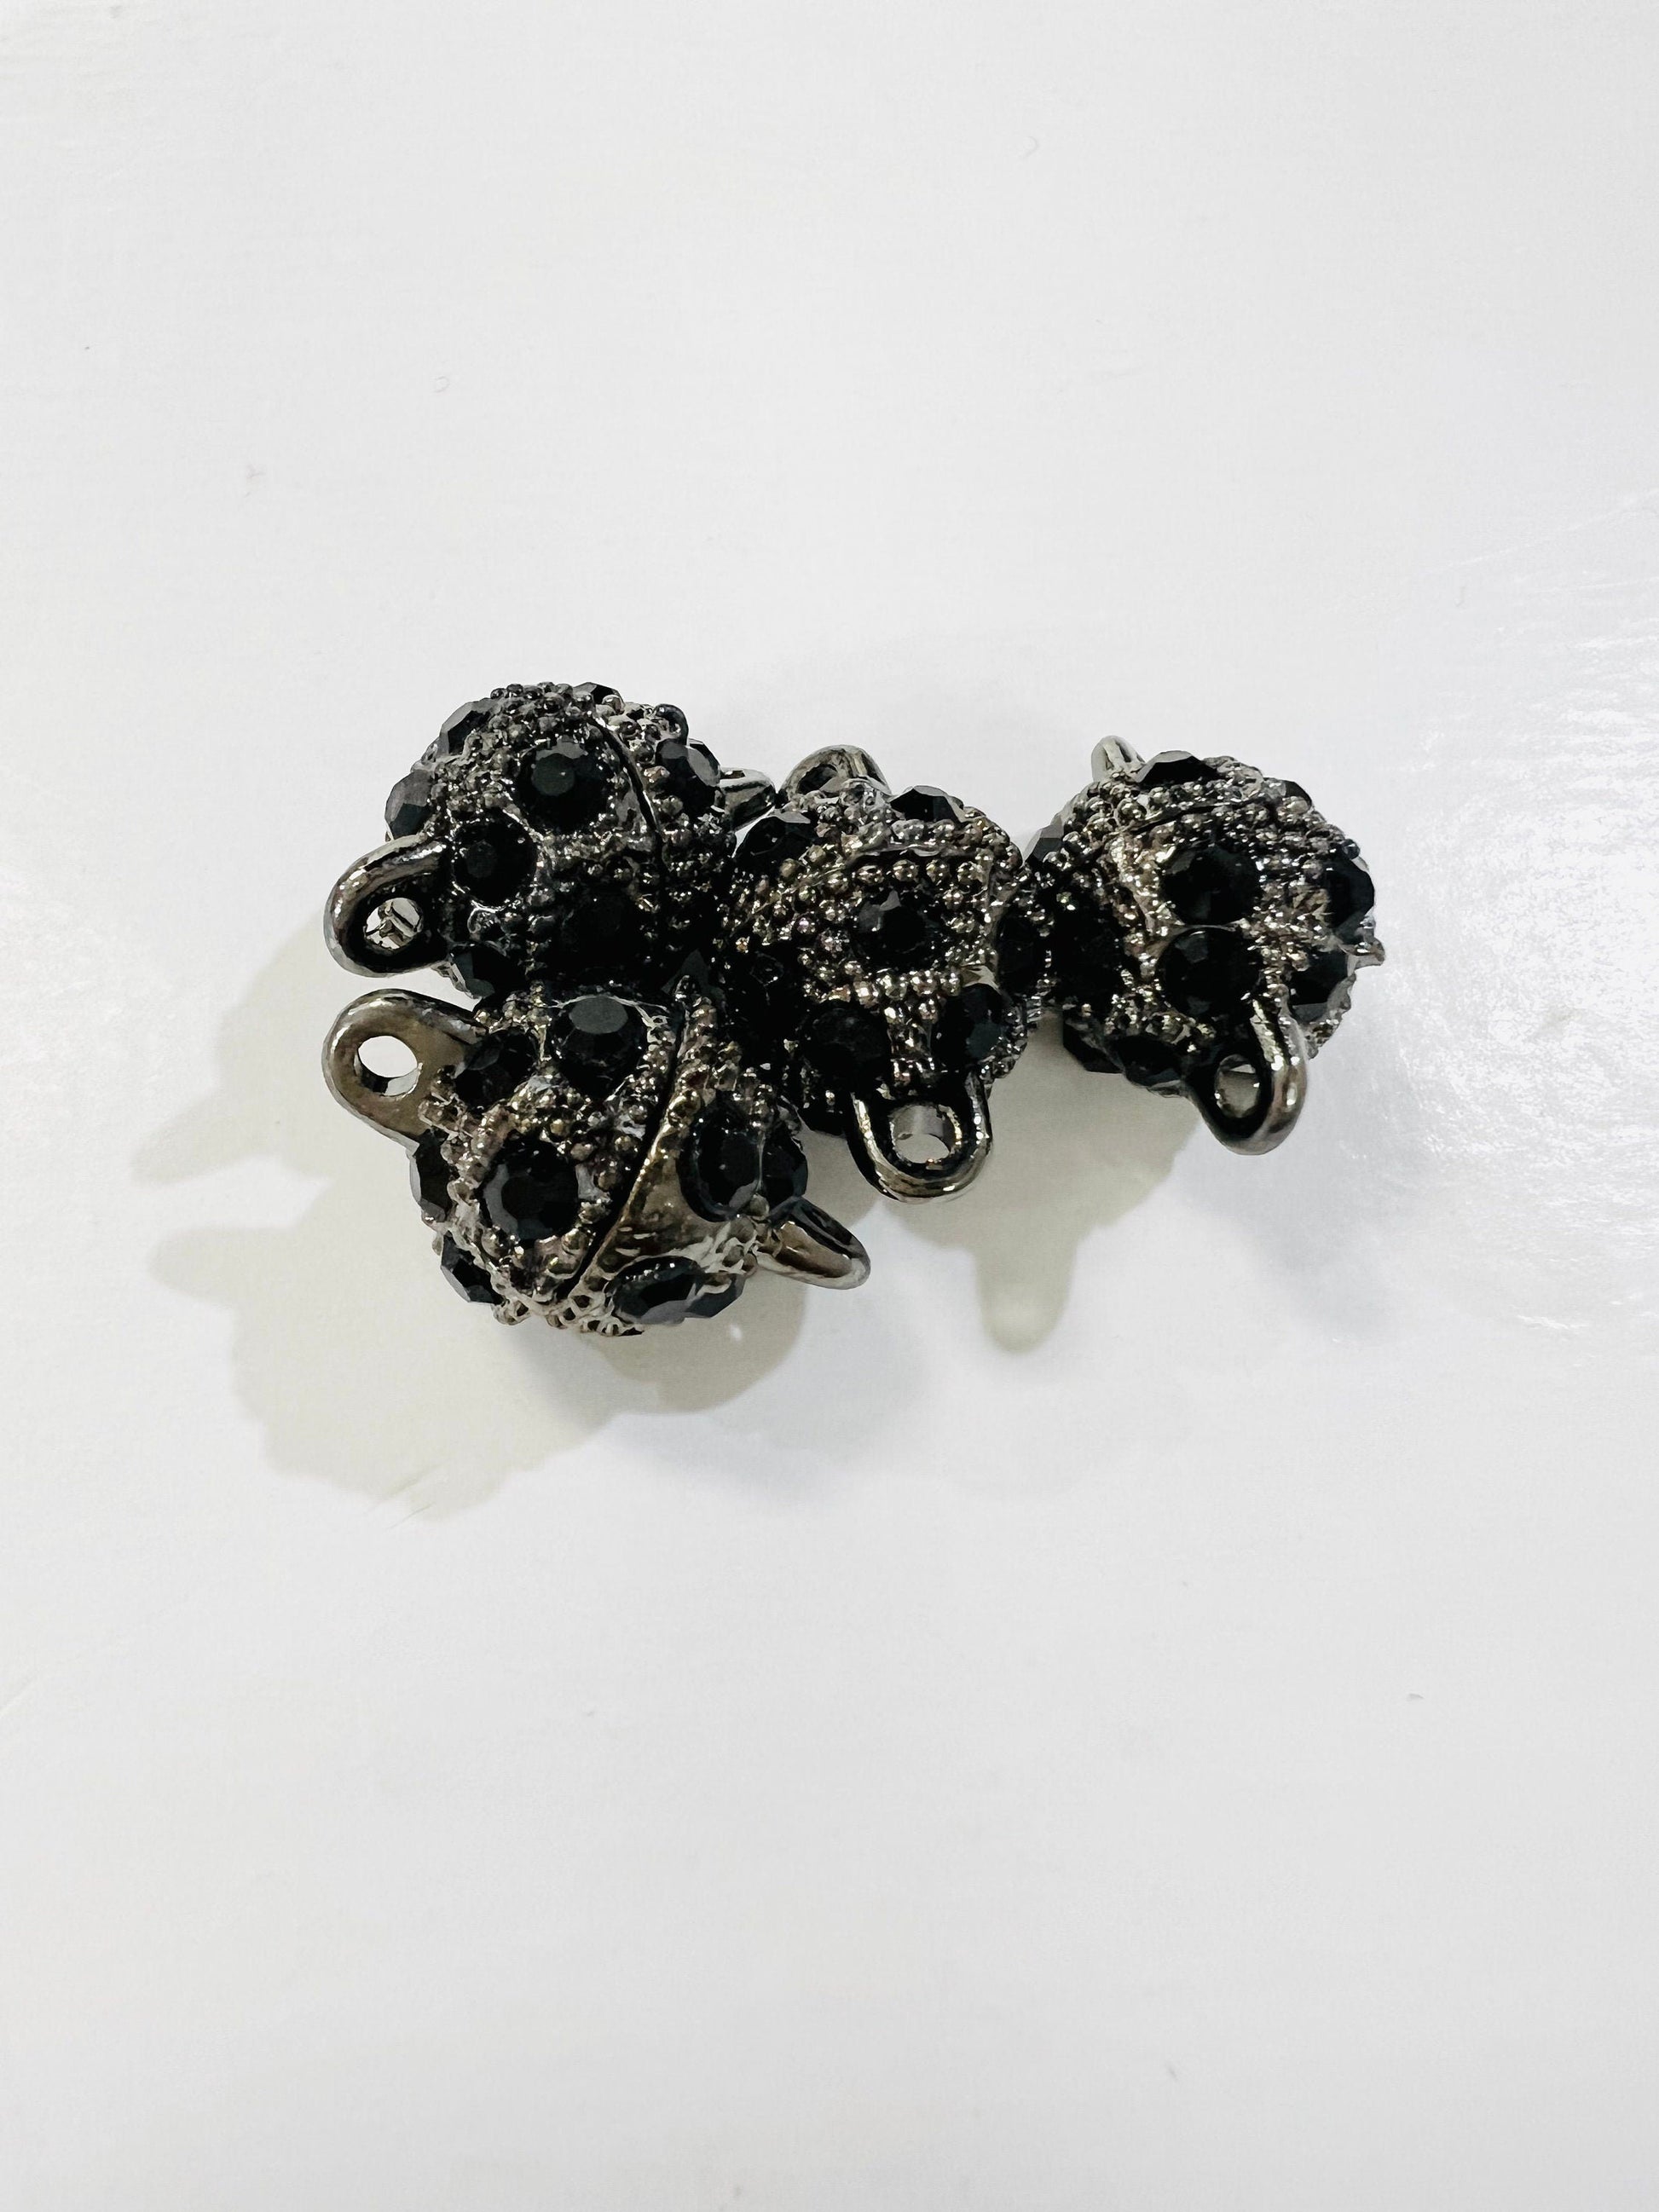 3 Sets Magnetic Clasp 10mm,12mm round black rhinestone crystal setting Oxidized brass fancy sparkle strong Magnet jewelry making clasp